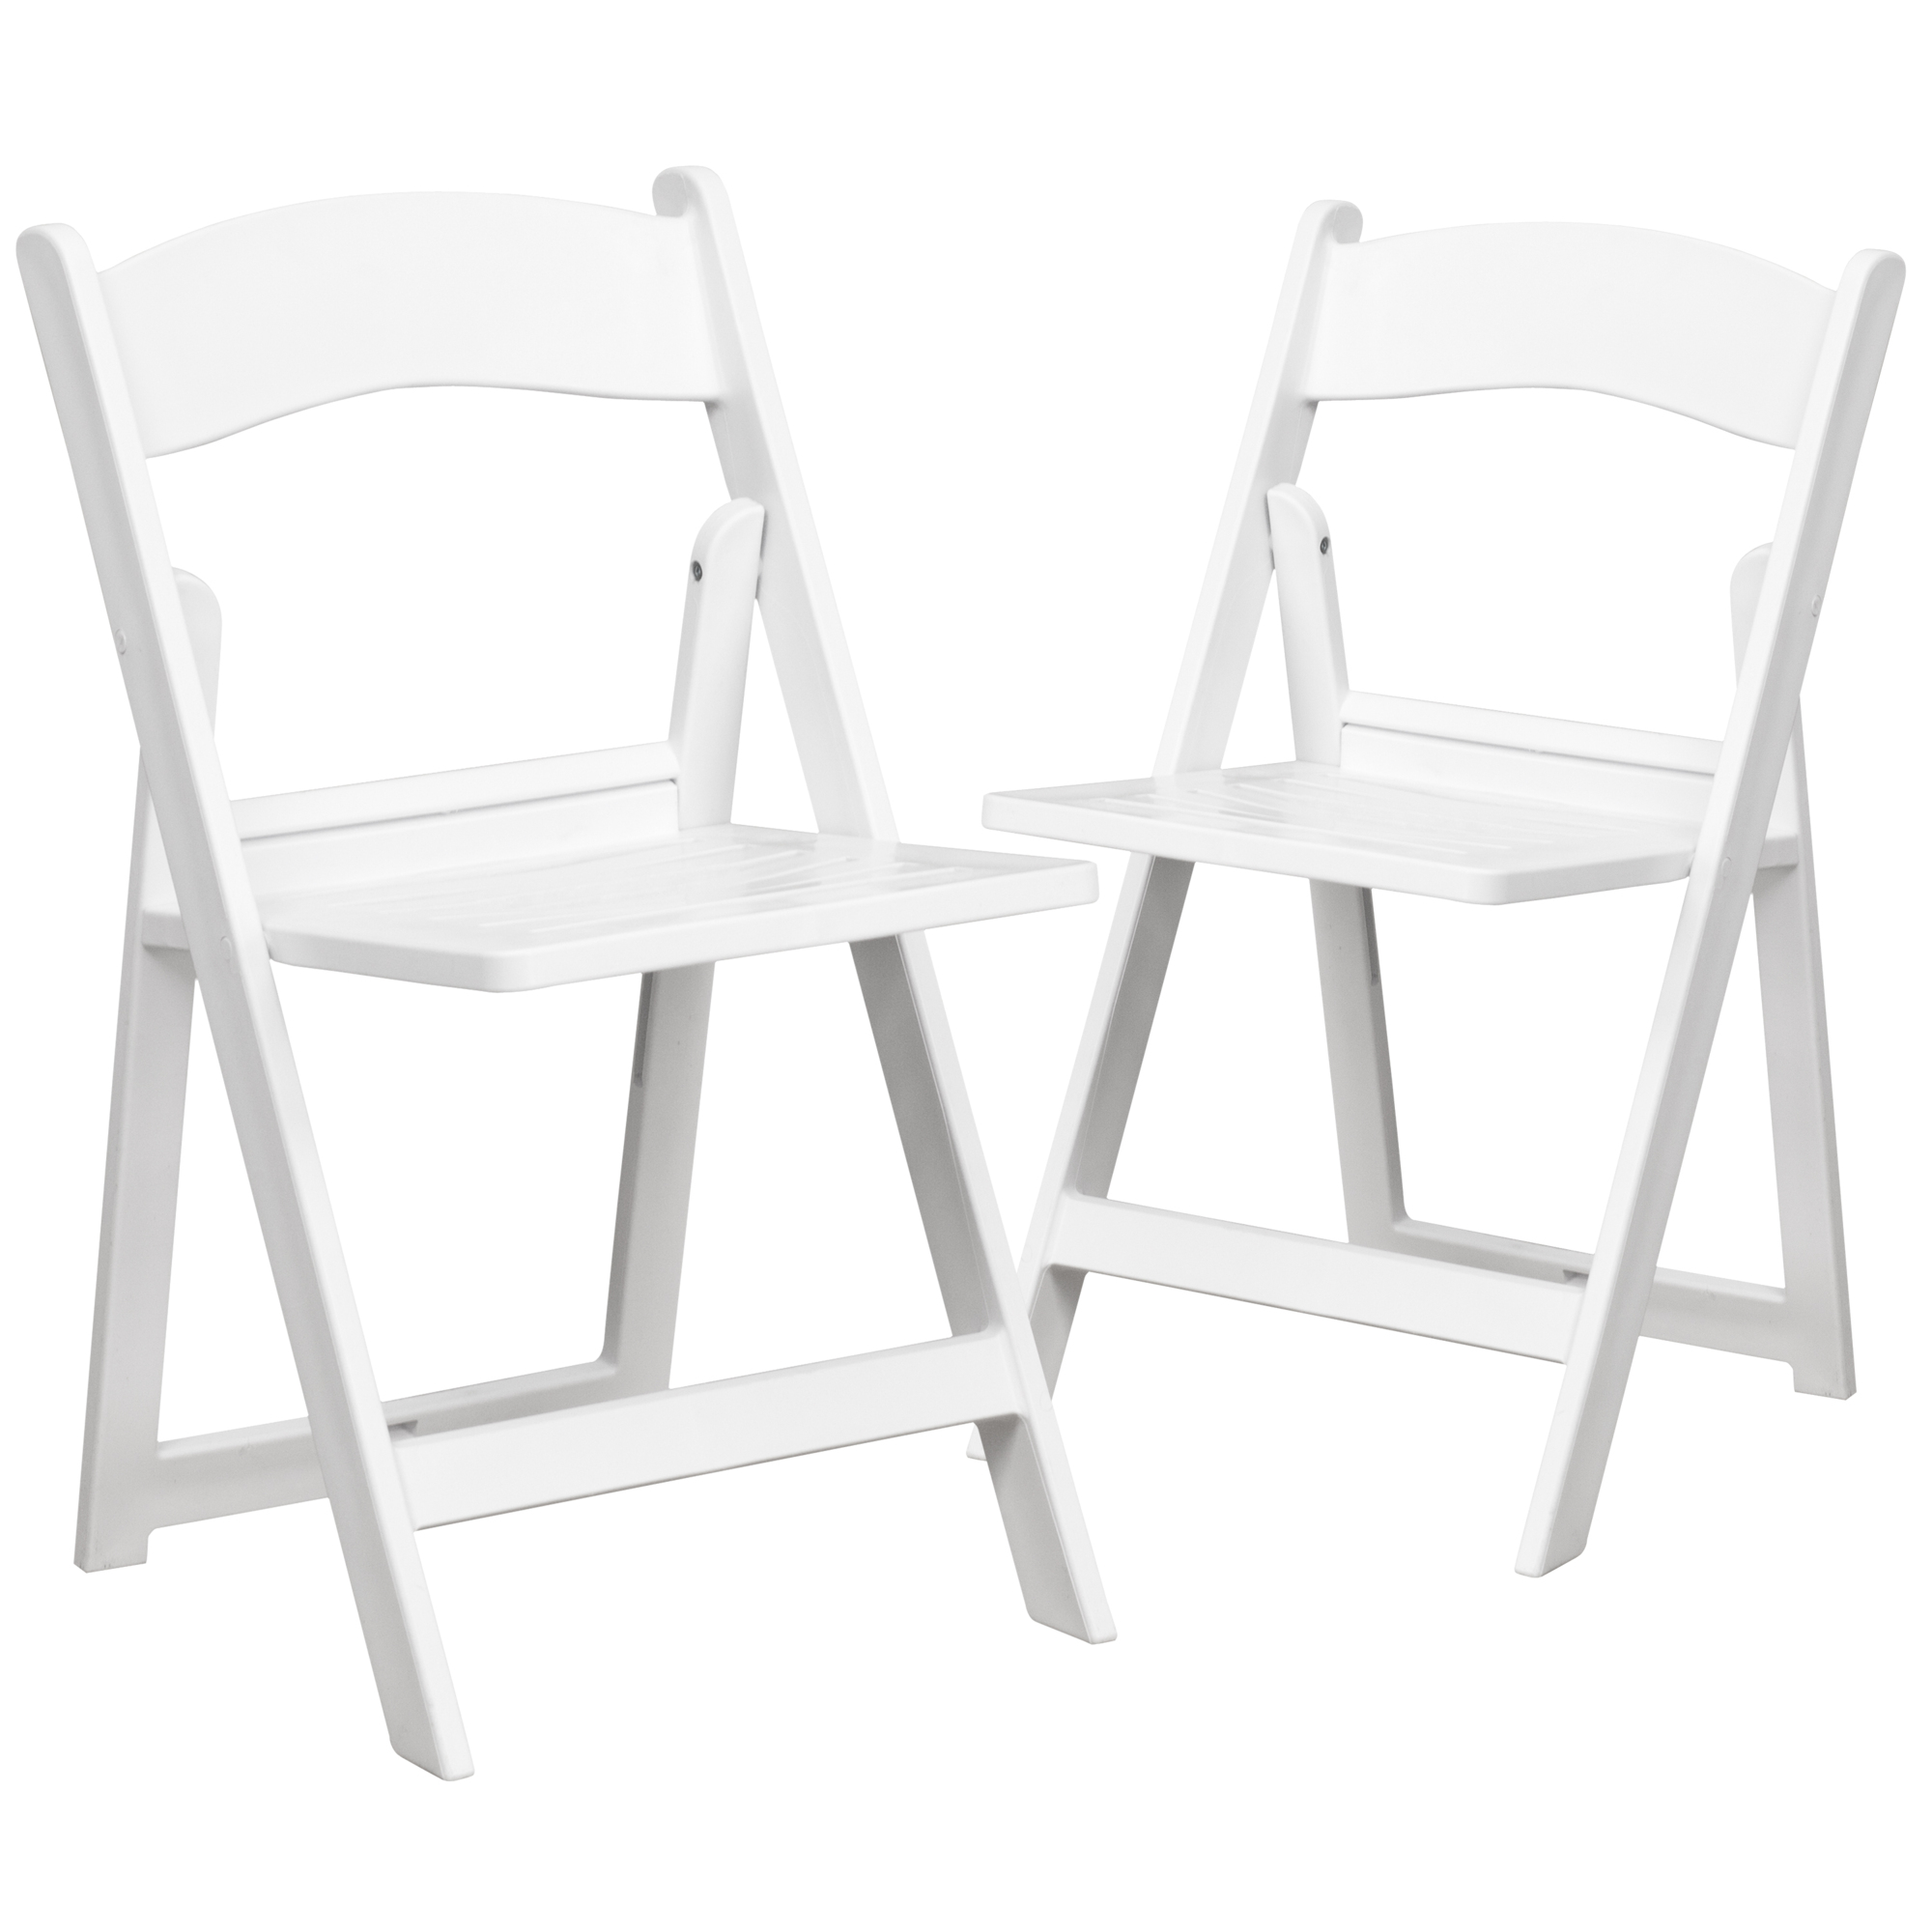 Flash Furniture, 2 Pack 1000 lb. Capacity White Resin Folding Chair, Primary Color White, Included (qty.) 2, Model 2LEL1WHSLAT